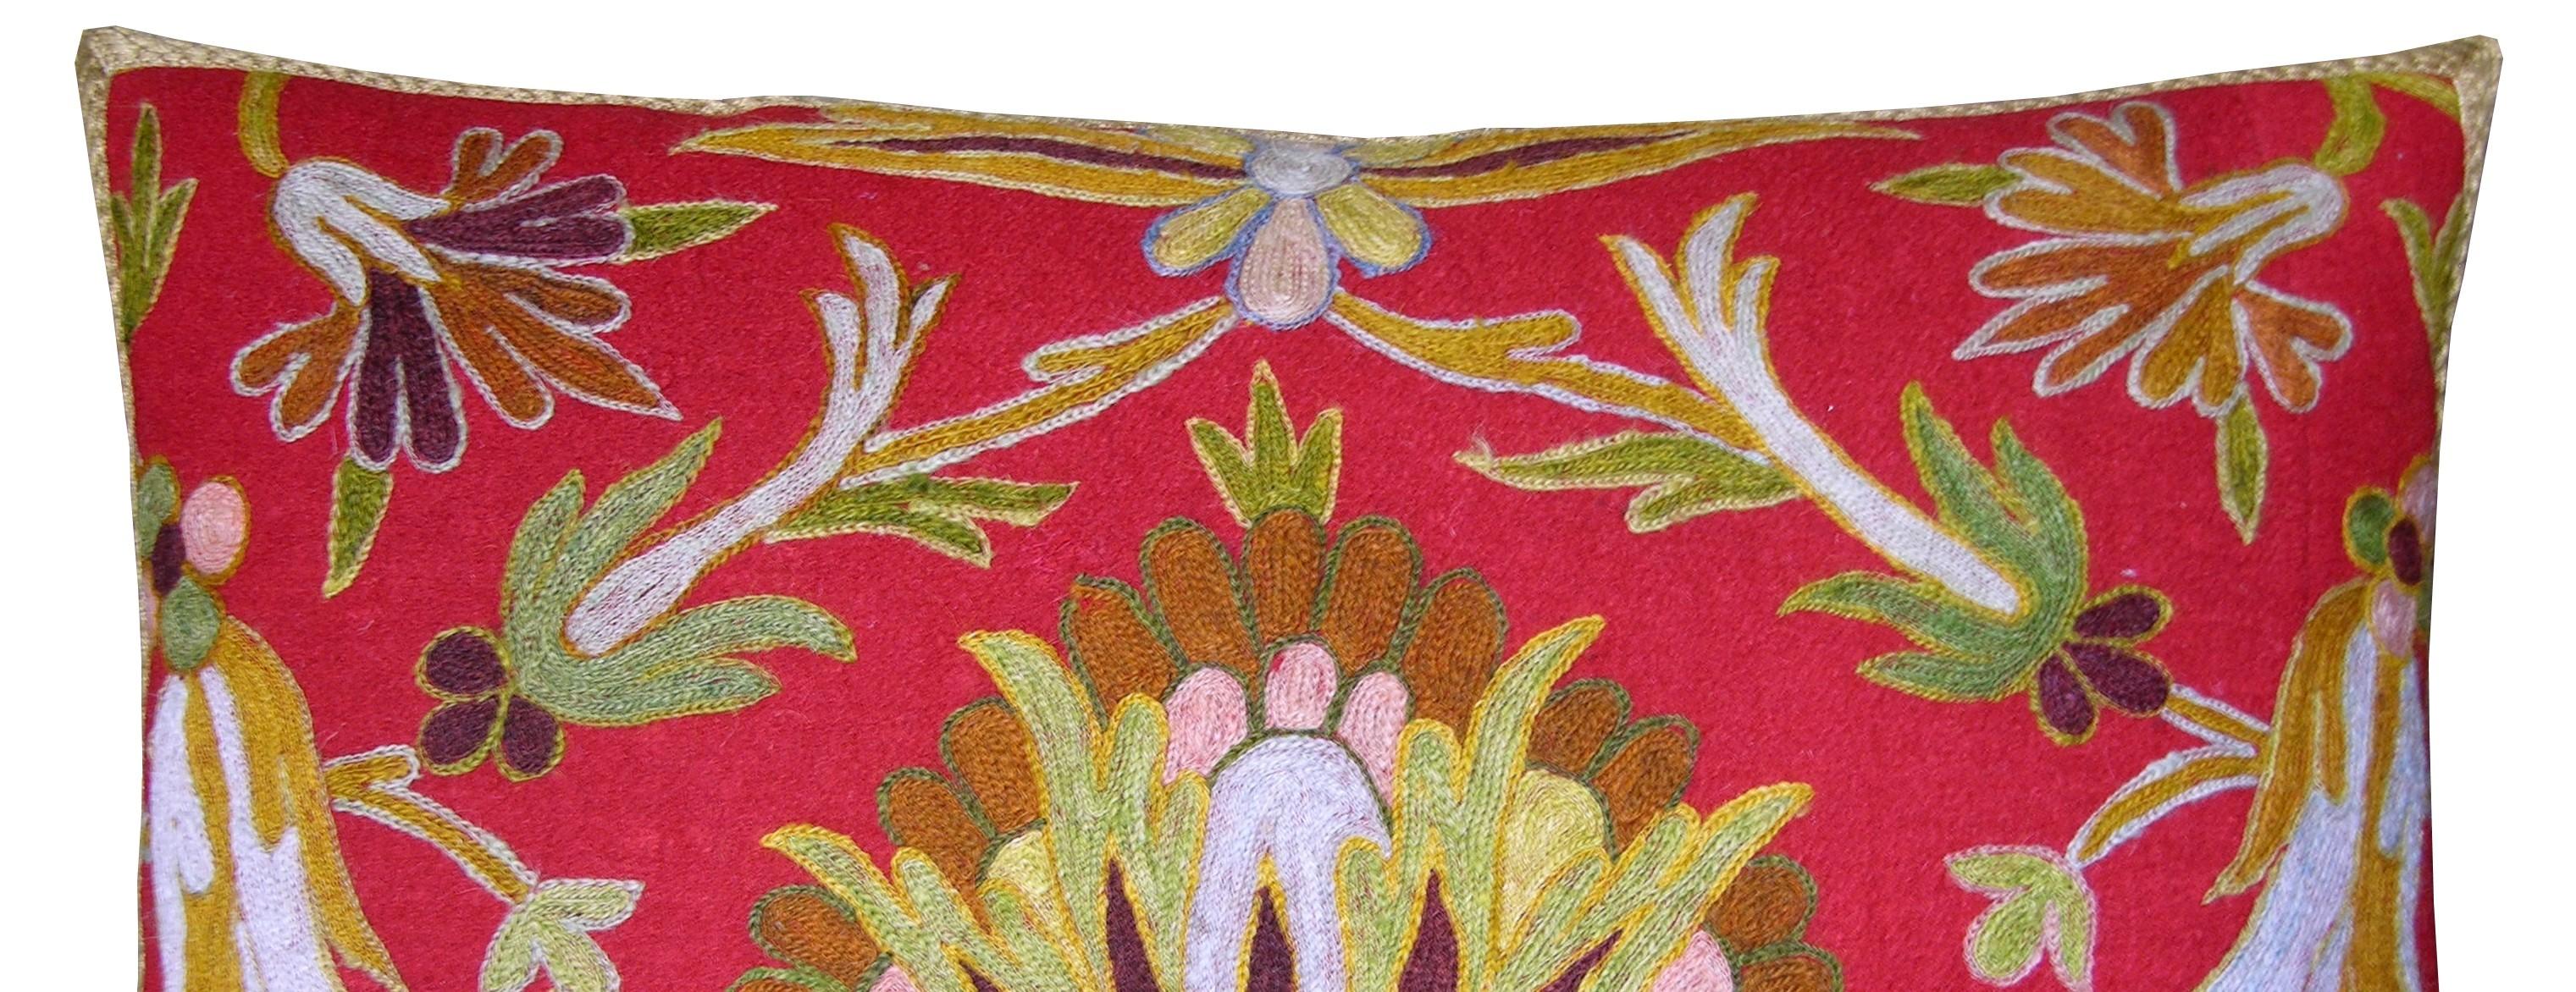 Circa 1900 Antique Embroidery Indian Pillow In Good Condition For Sale In Los Angeles, US